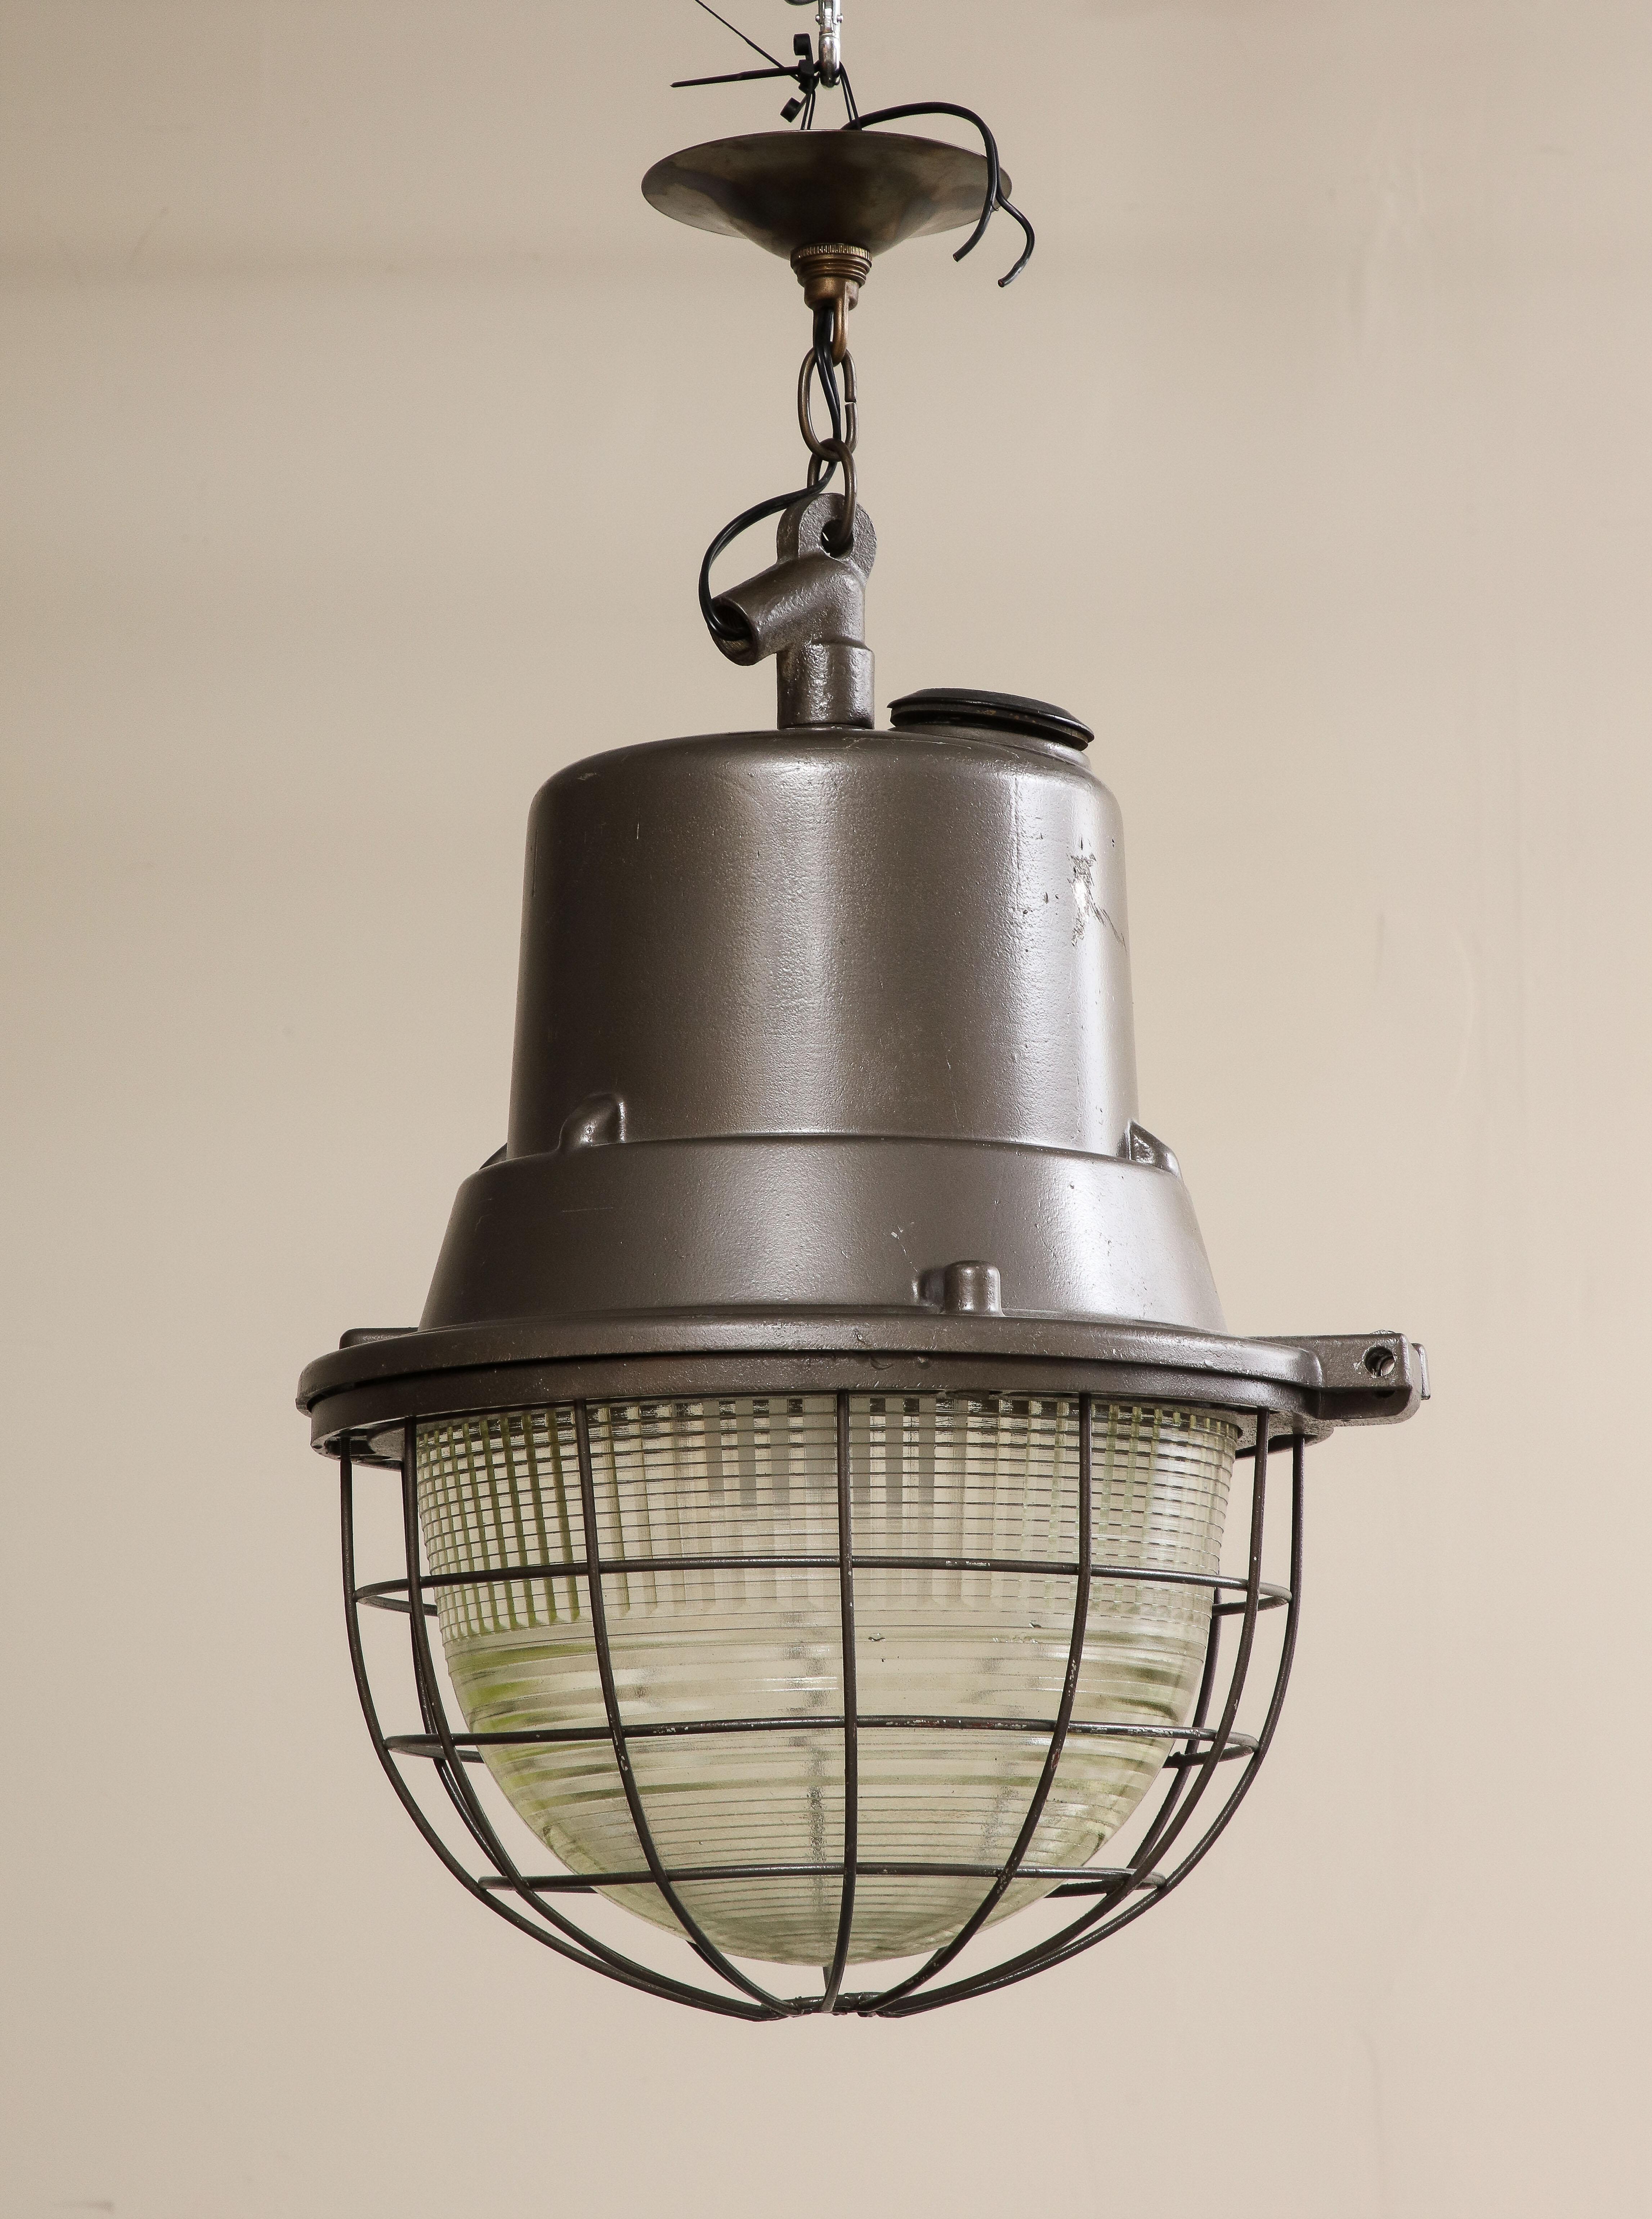 Mid-20th Century Industrial Pendant Light with Original Glass, c. 1940 For Sale